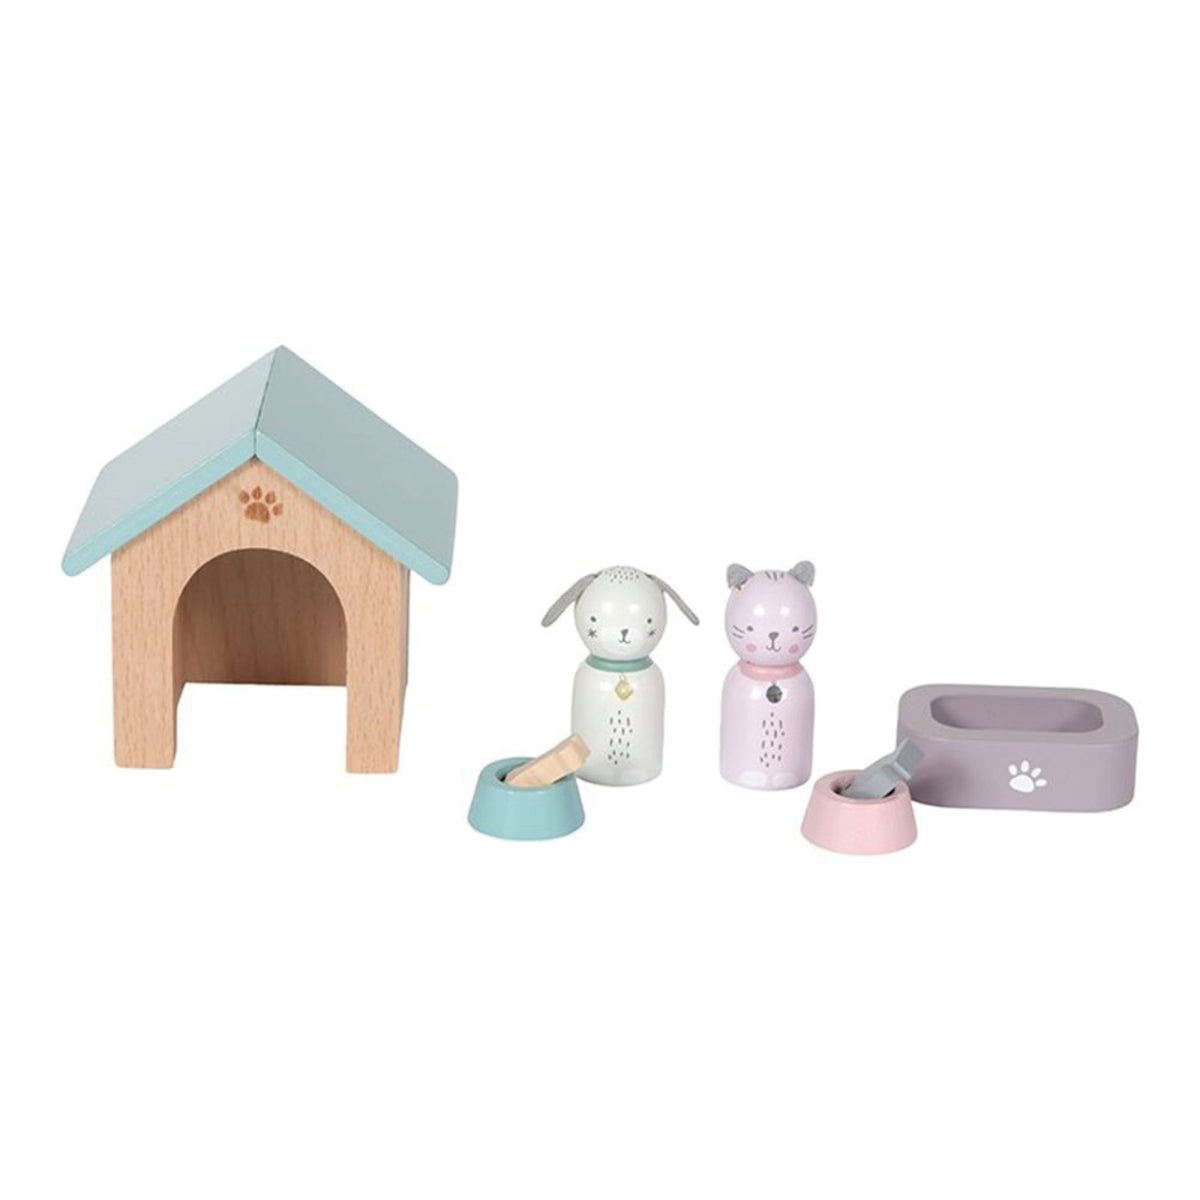 Doll’s house Pets playset - LD4475